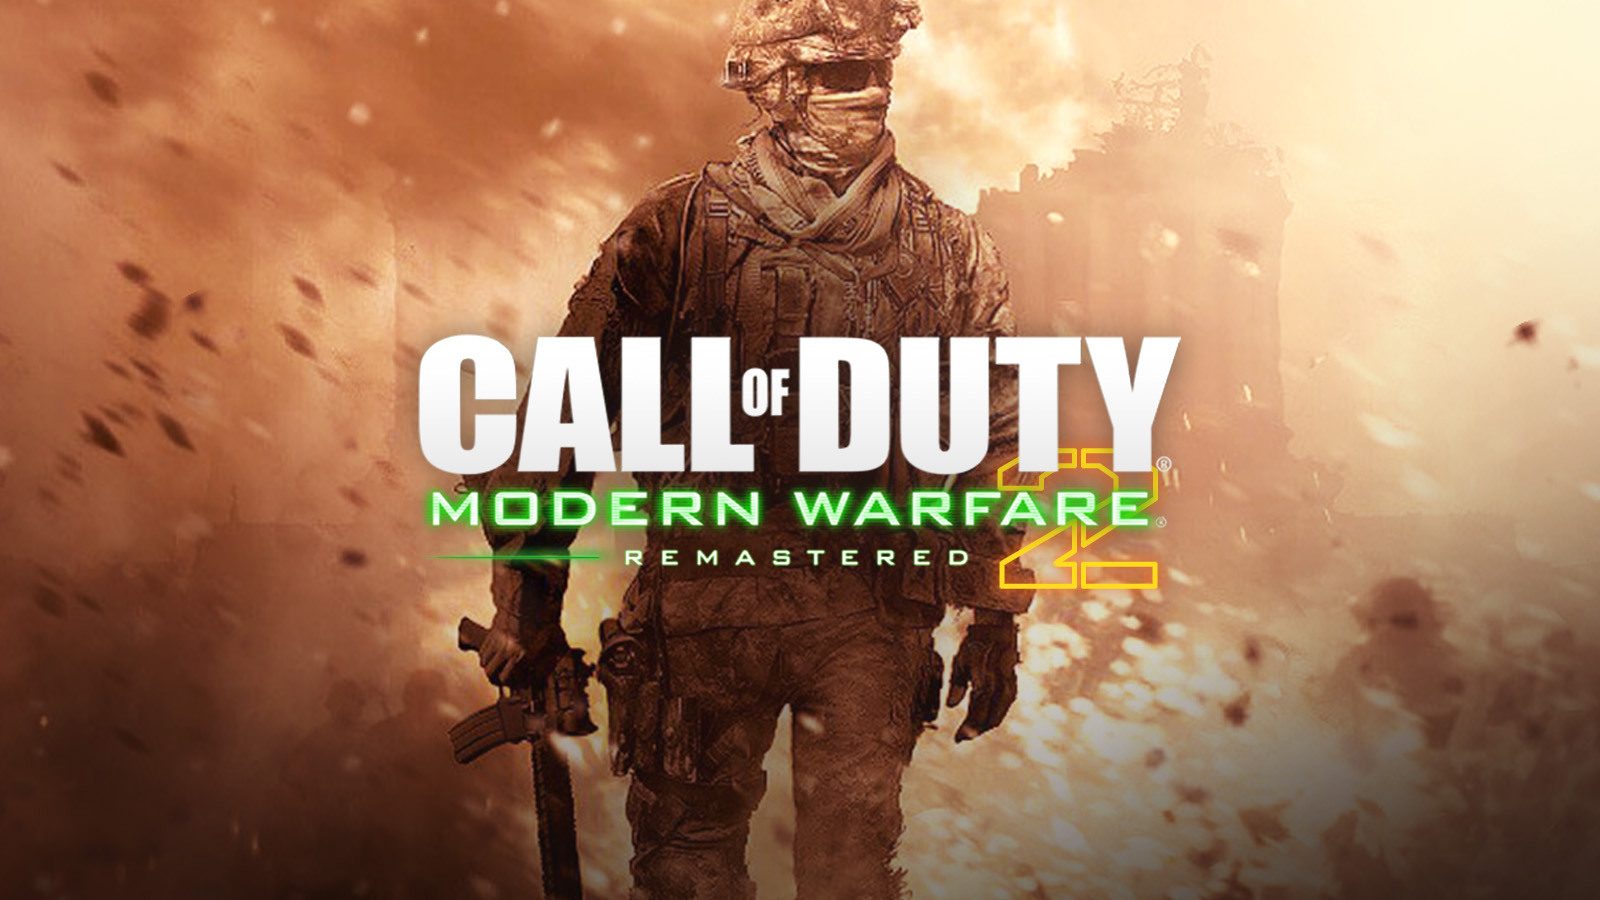 modern warfare 2 mw2 remastered remaster remake release date when is coming cod call of duty